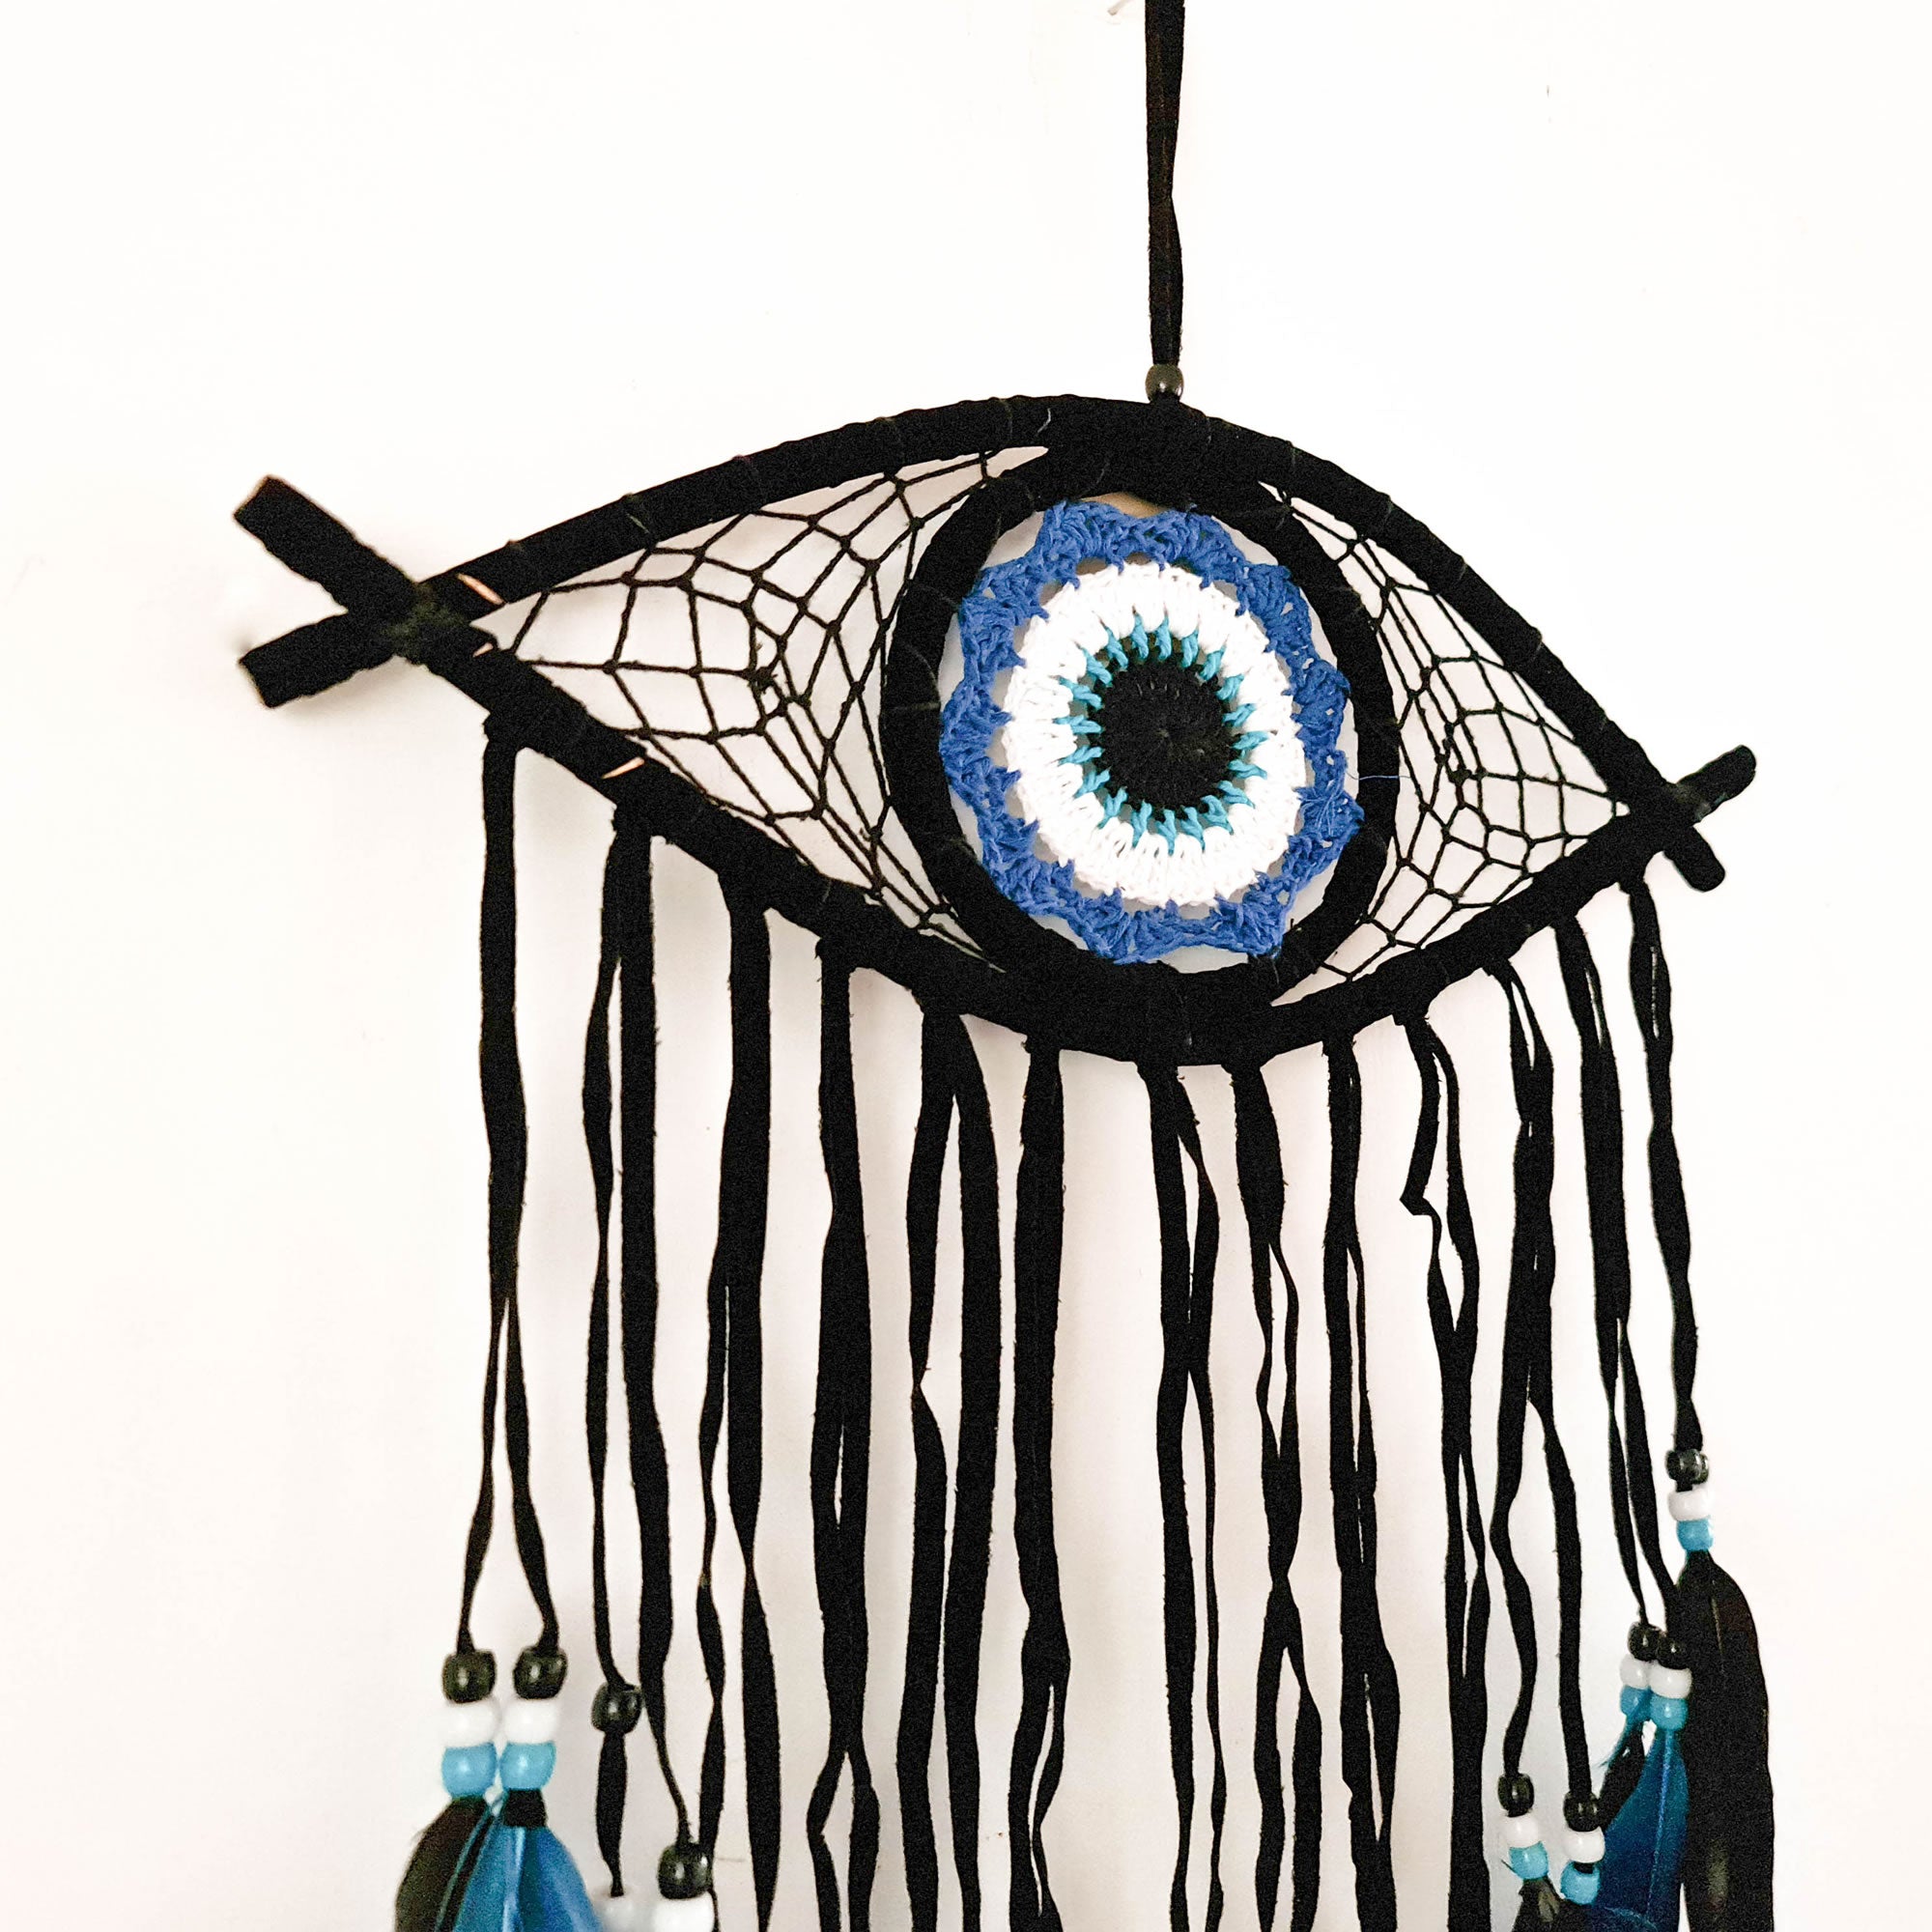 A beautiful Nazar Turkish Evil Eye Handmade Bohemian Macramé Beads Dream Catcher Car Wall Hanging Decoration Art, a perfect gift. A unique piece with subtle colors and beads to give an elegant touch.